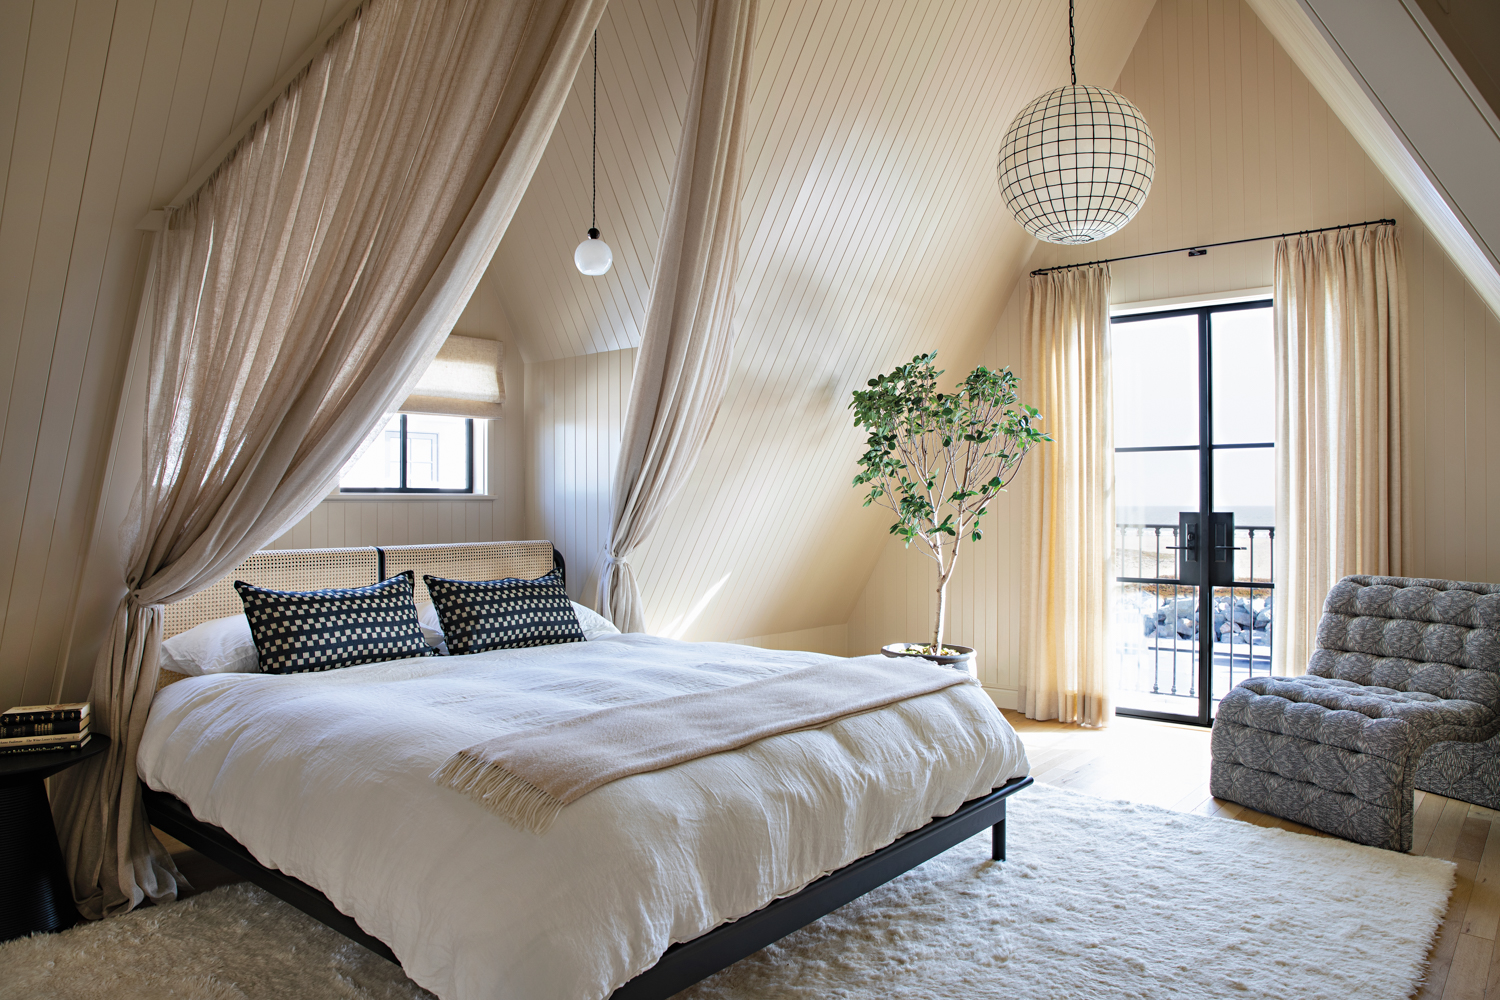 Bedroom with gabled ceilings, drapes around a white bed, sheer window treatments and a wool rug